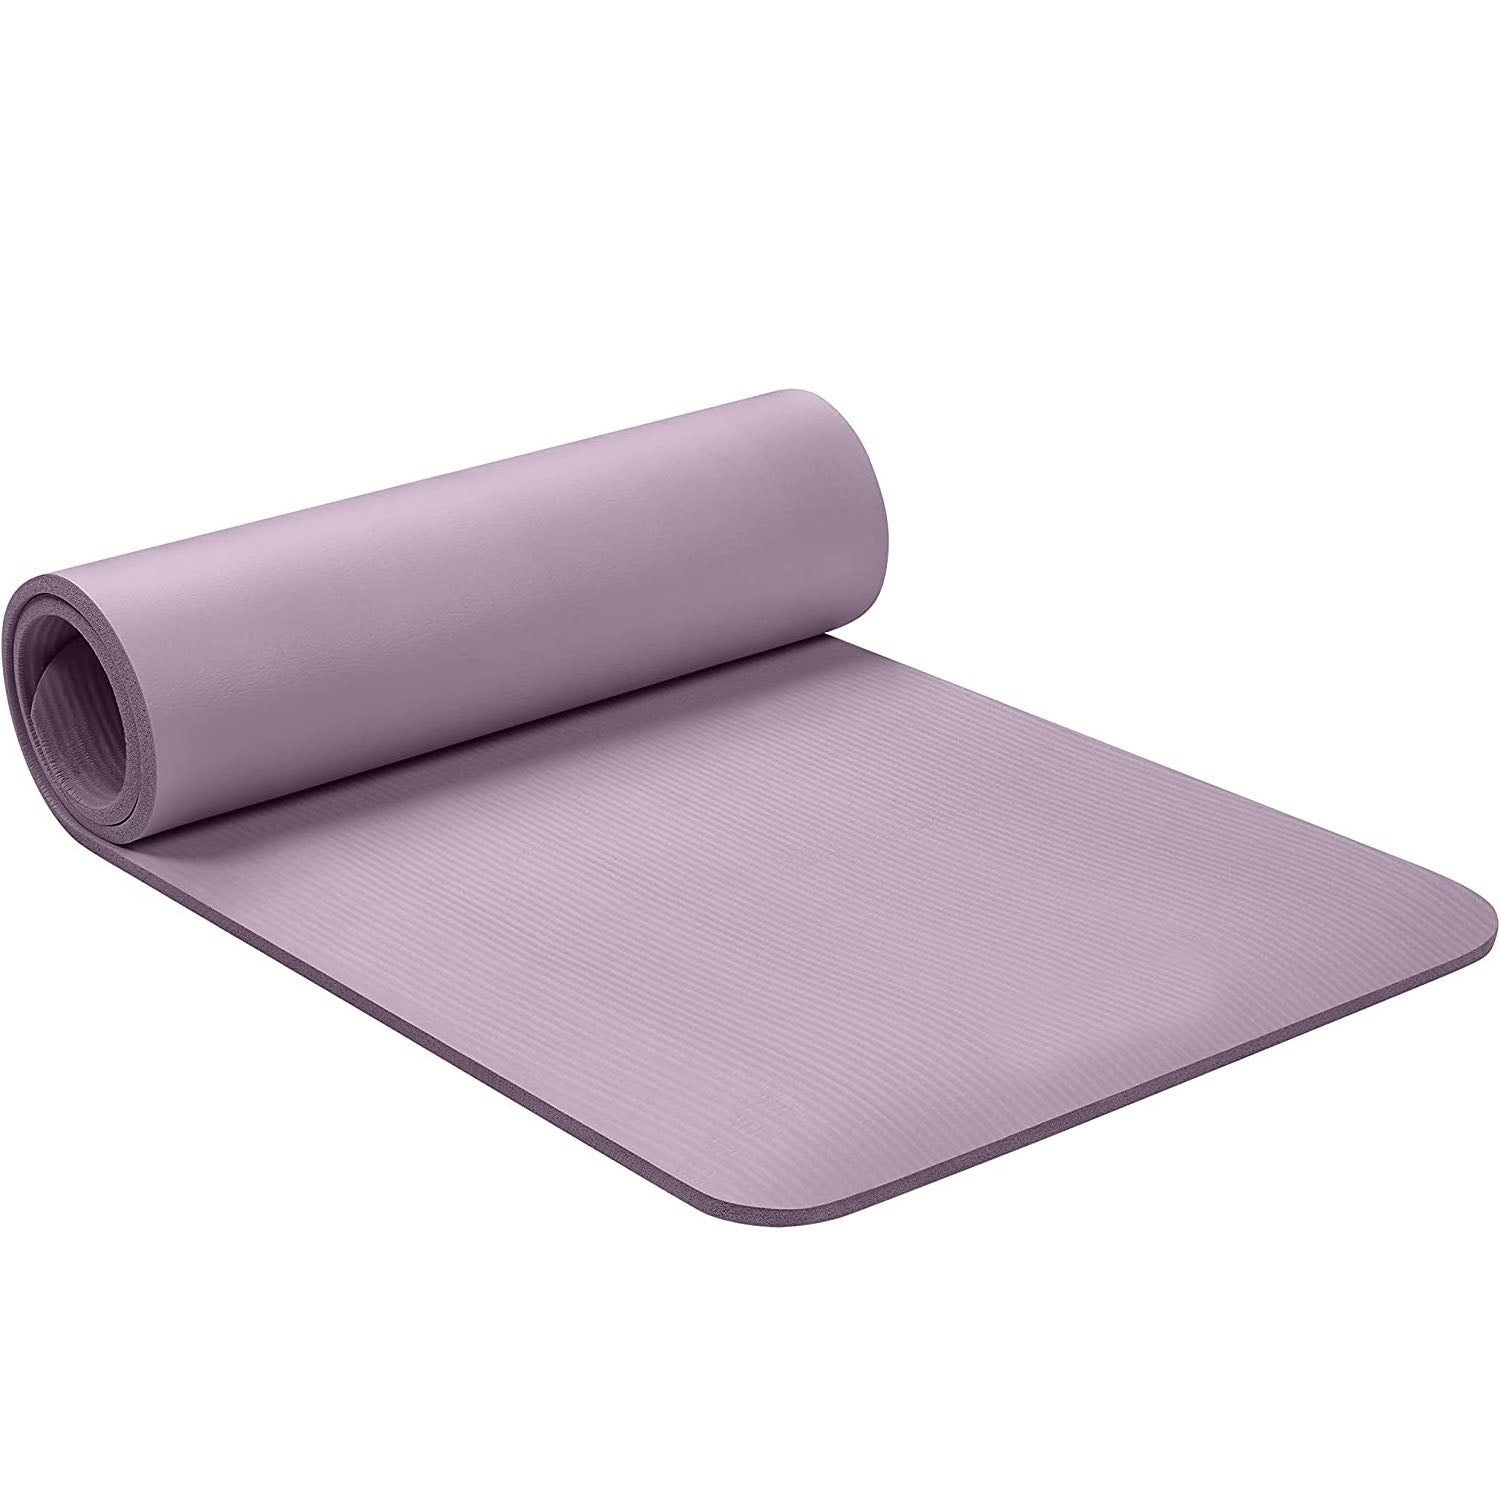 Stunner 8mm Yoga Mat, NBR Material with Carrying Strap, 8mm Extra Thick Exercise Yoga Mats for Workout Yoga Mat Yoga | Fitness | Anti Slip Yoga Mats